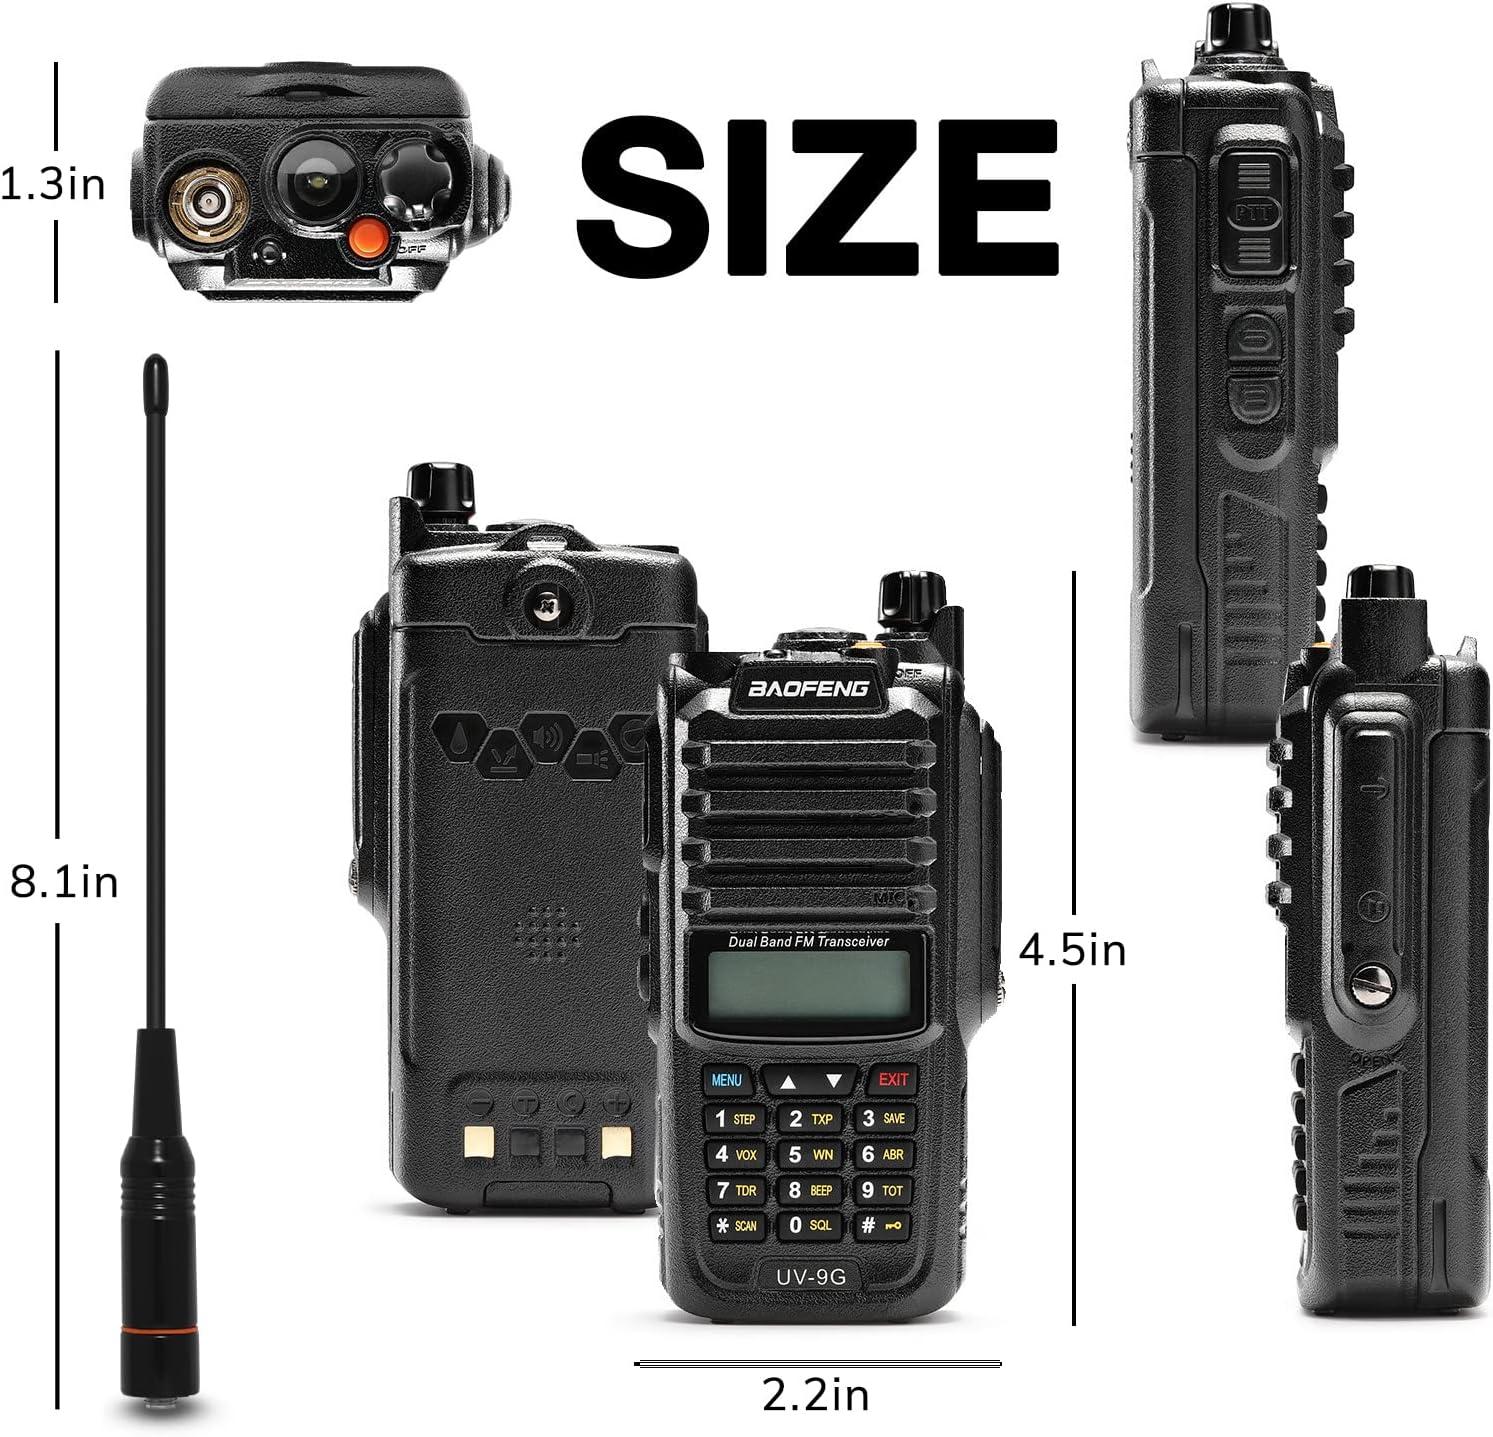 GMRS Radio Baofeng Walkie Talkies for Adults Long Range 2 Way Radio  Waterproof MP31 Rechargeable Walkie Talkies with NOAA,GMRS Repeater Capable  and